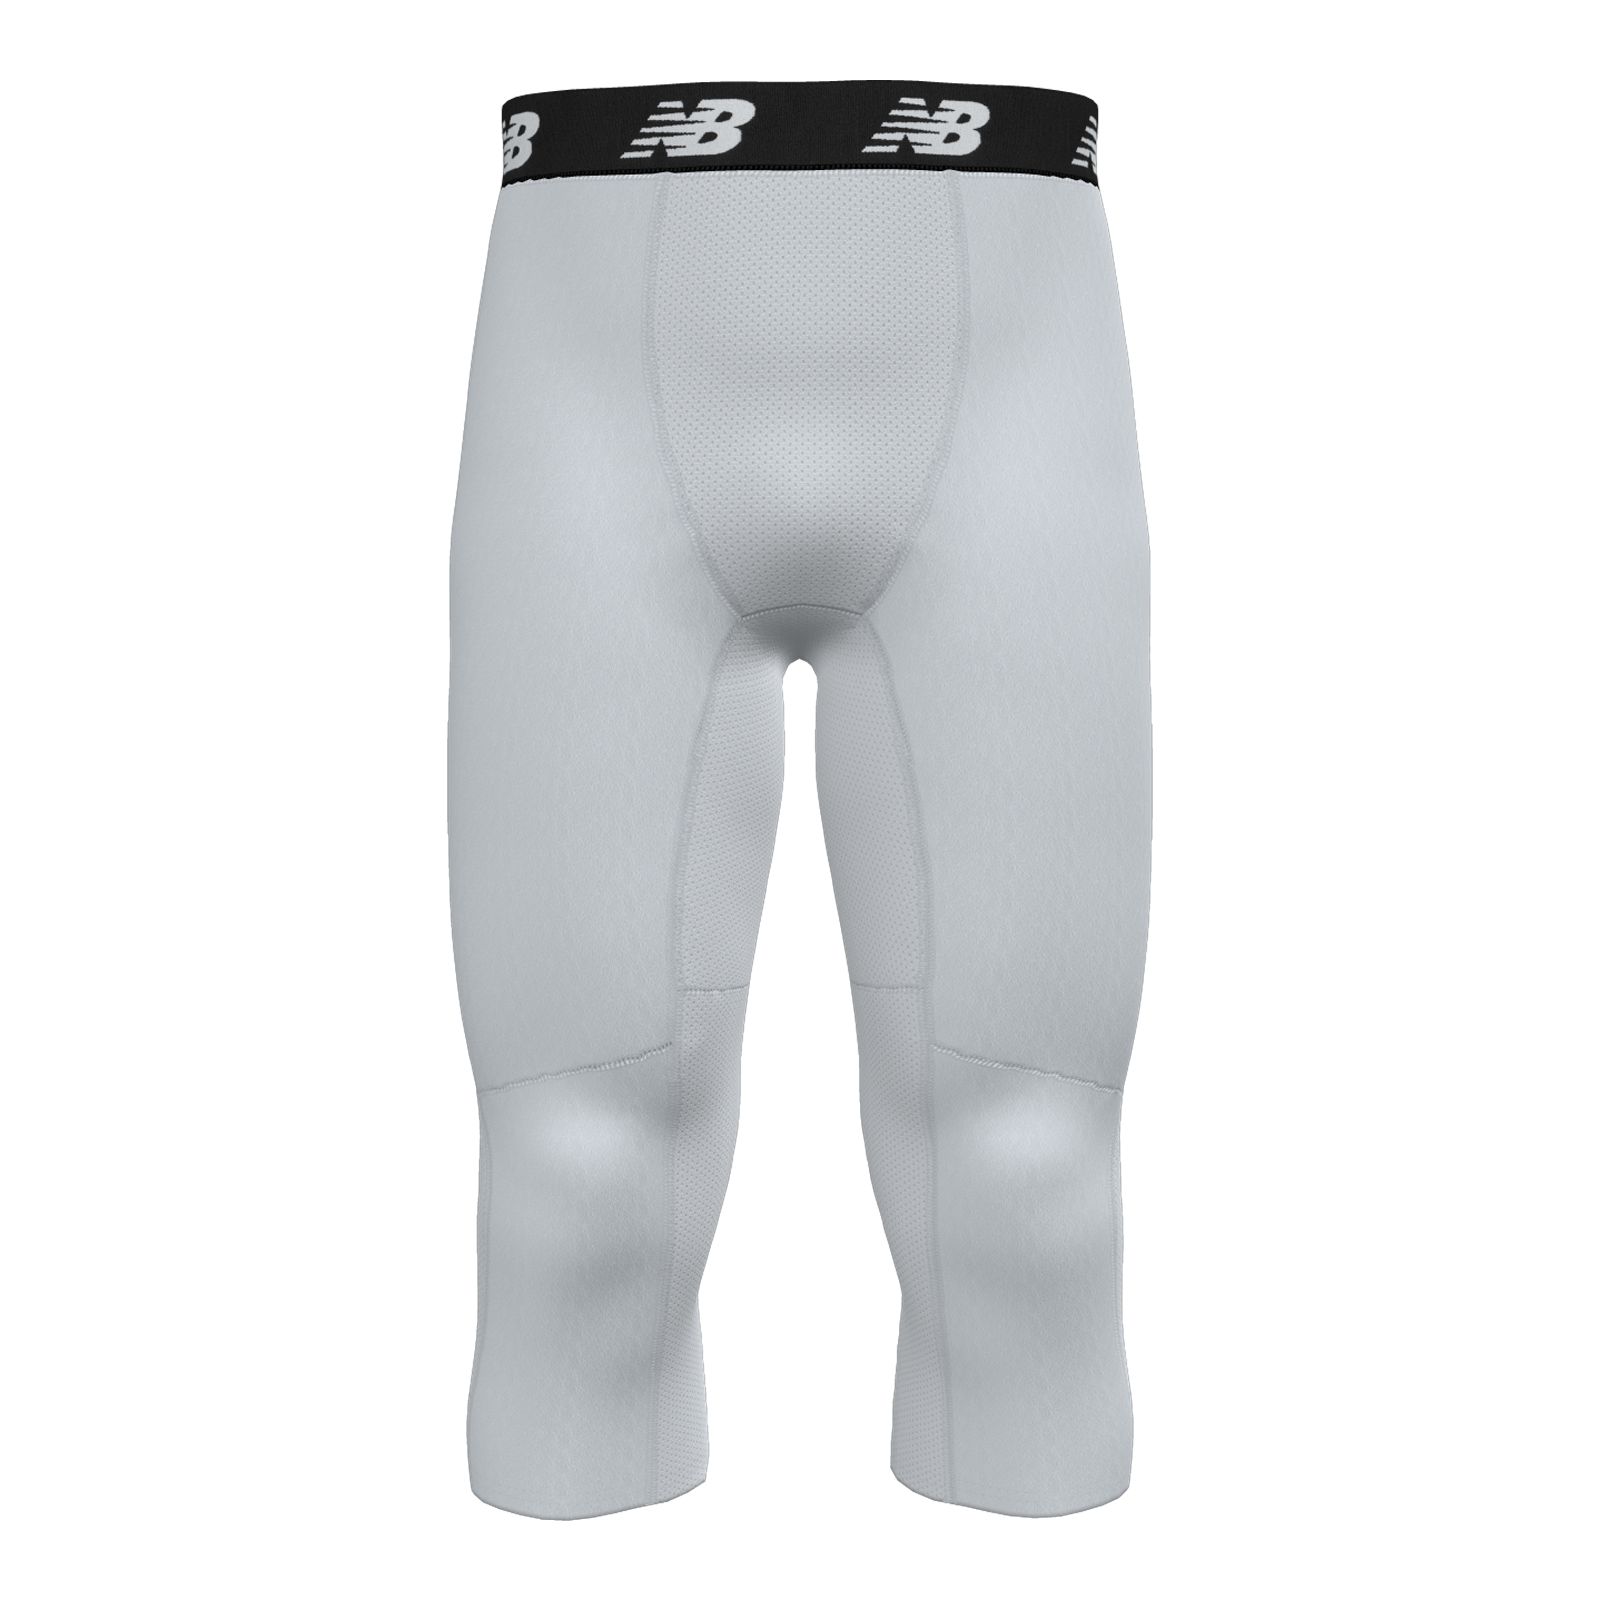 Athletic 3/4 Compression Tights (White) - For Football, Basketball, Lacrosse